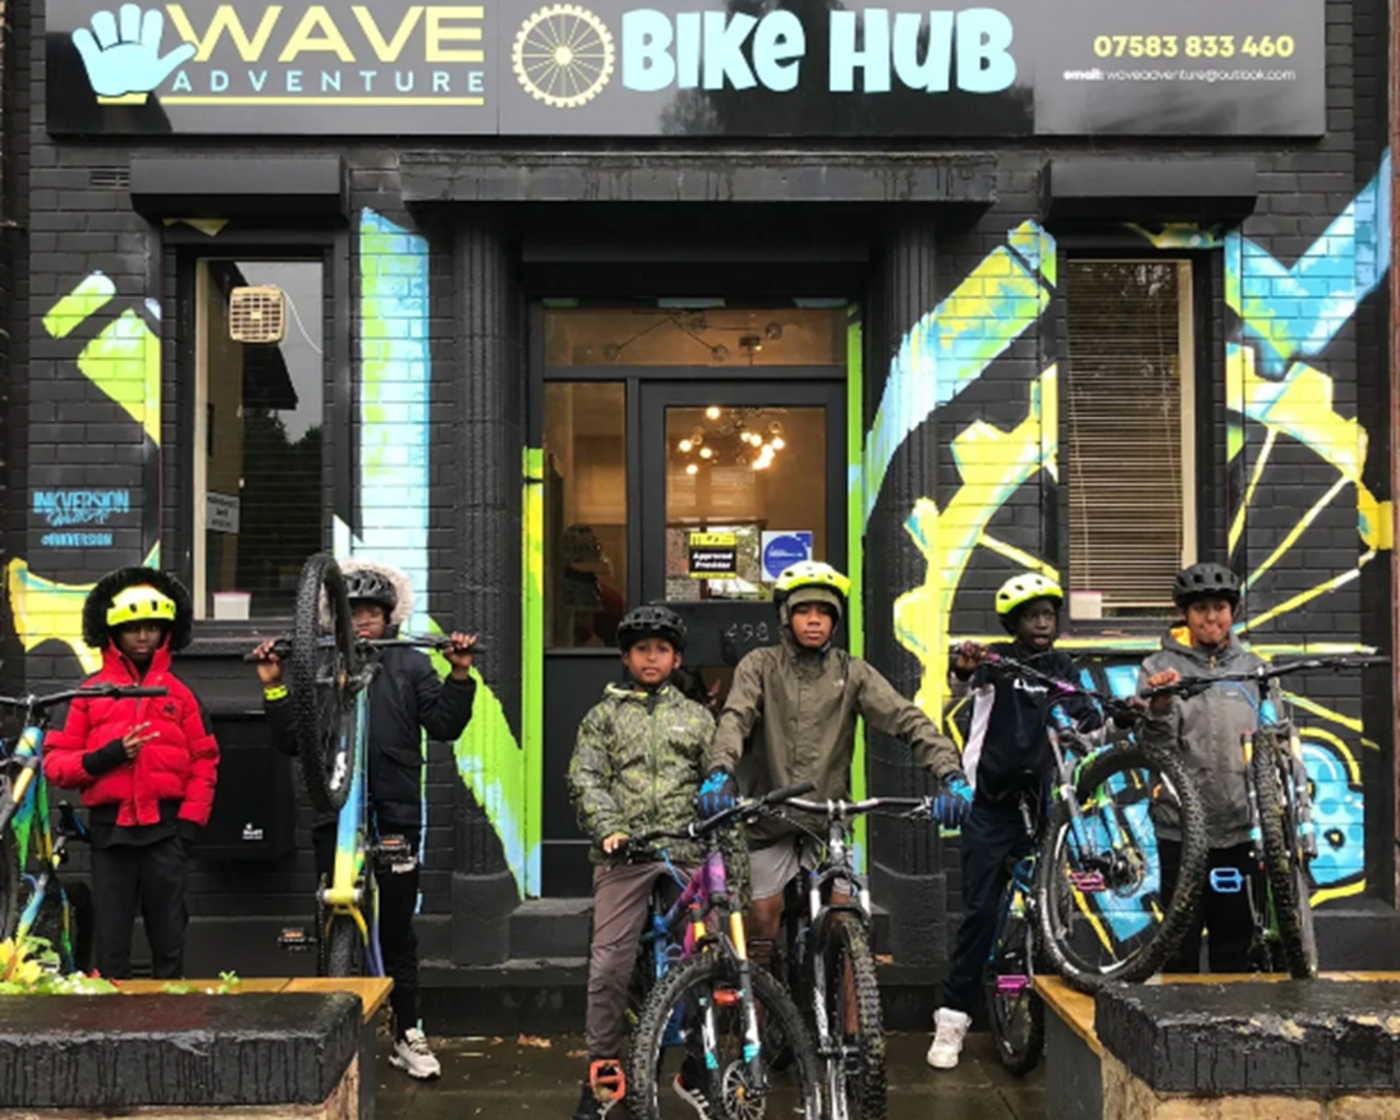 Group of young people outside of the wave adventures hub on bikes